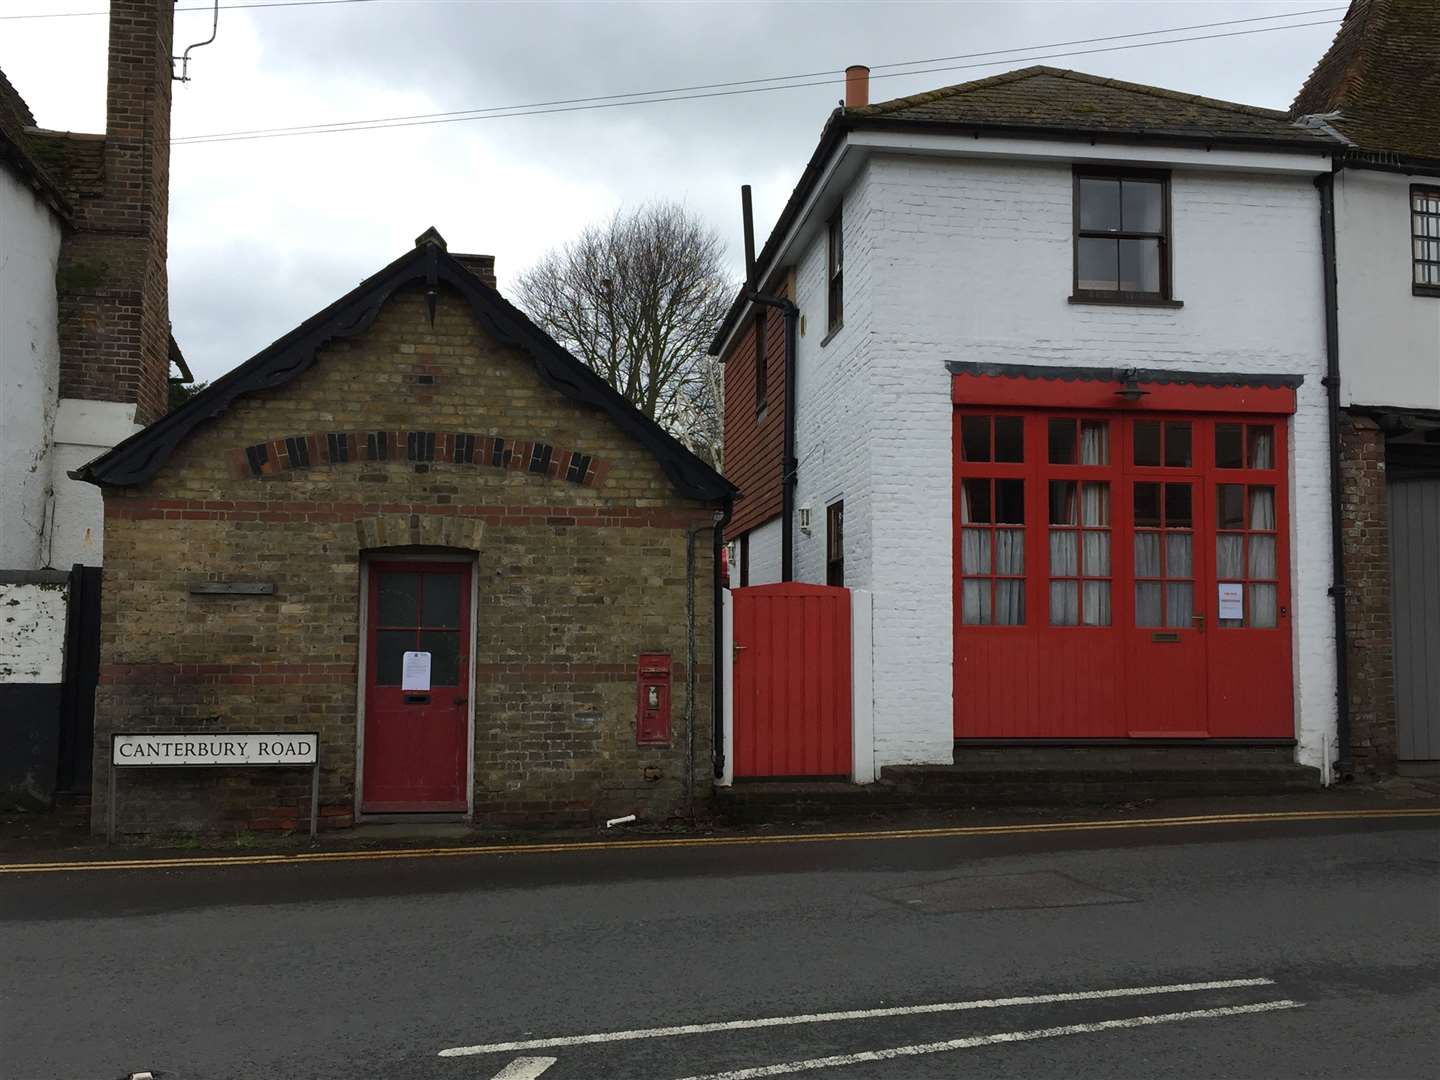 The store is part of Wingham's old fire station